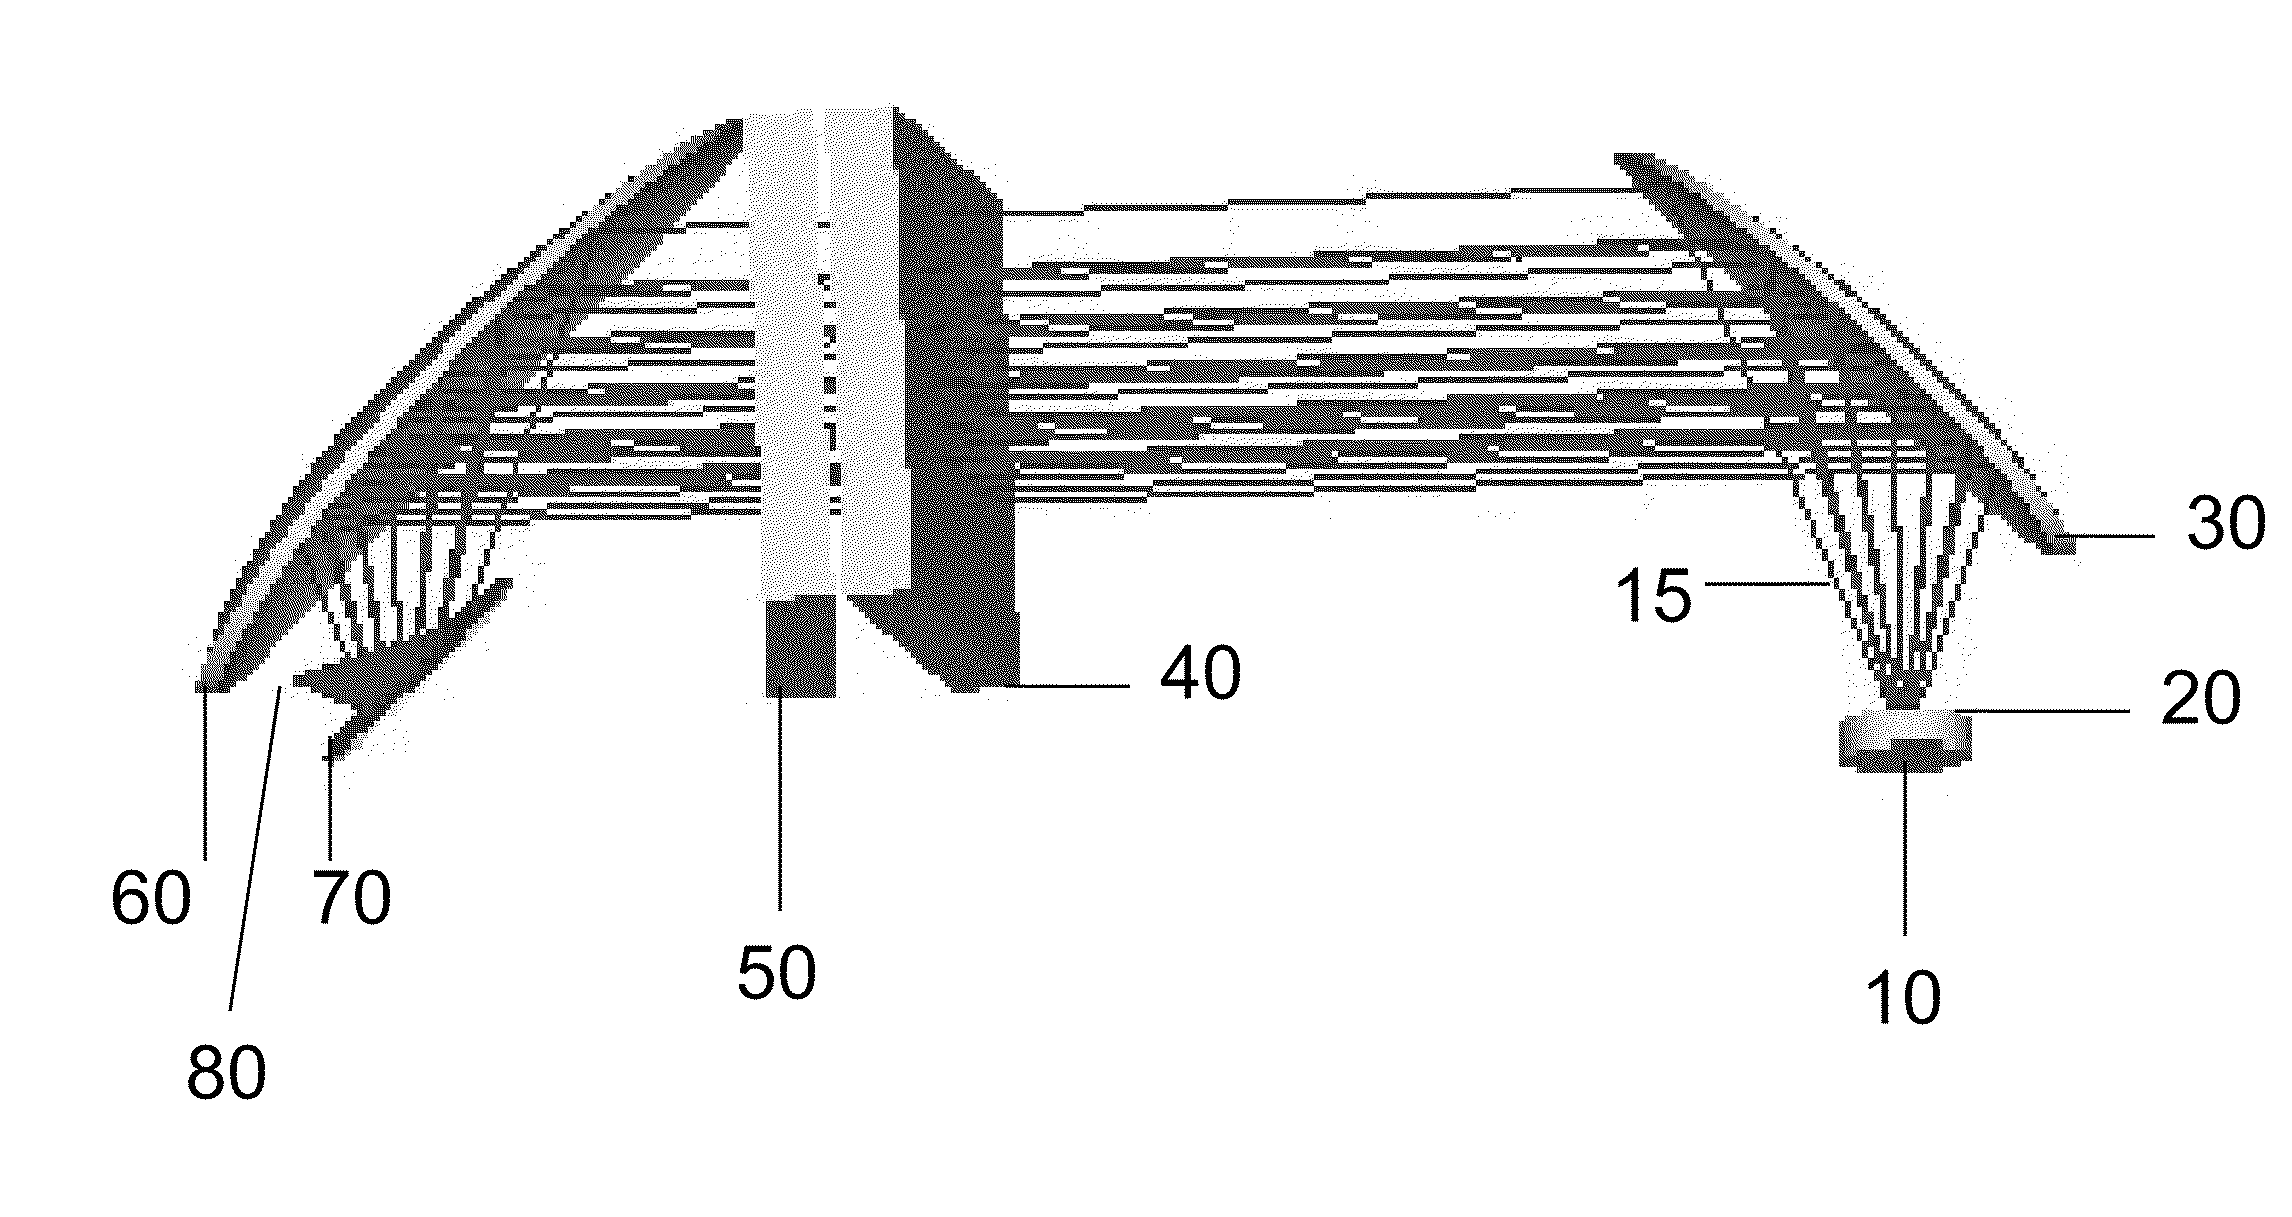 All Reflective Apparatus for Injecting Excitation Light and Collecting In-elastically Scattered Light from a Sample